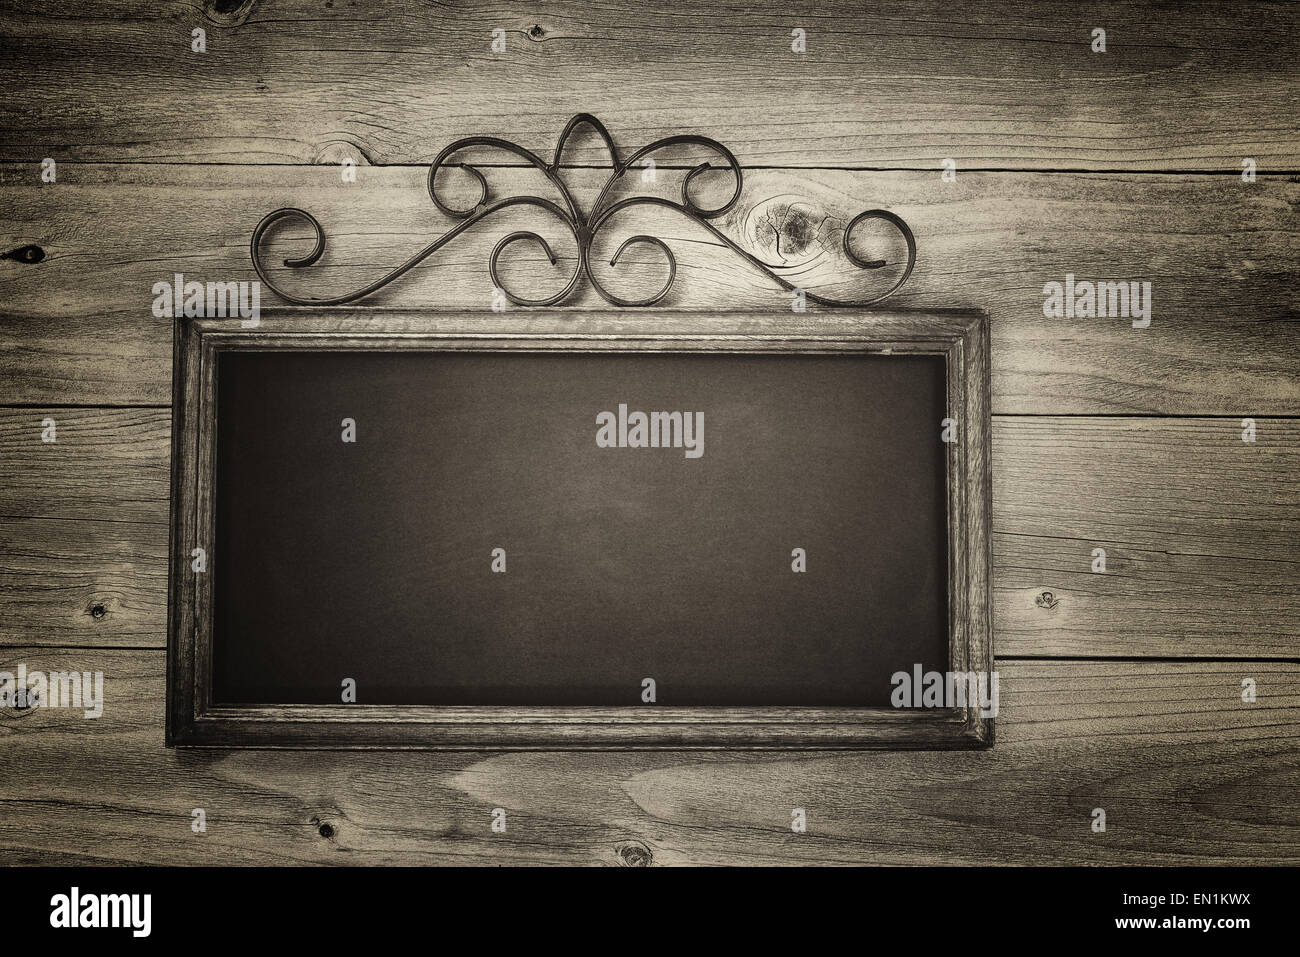 Vintage concept of a chalkboard on rustic wood. Layout in horizontal format. Stock Photo